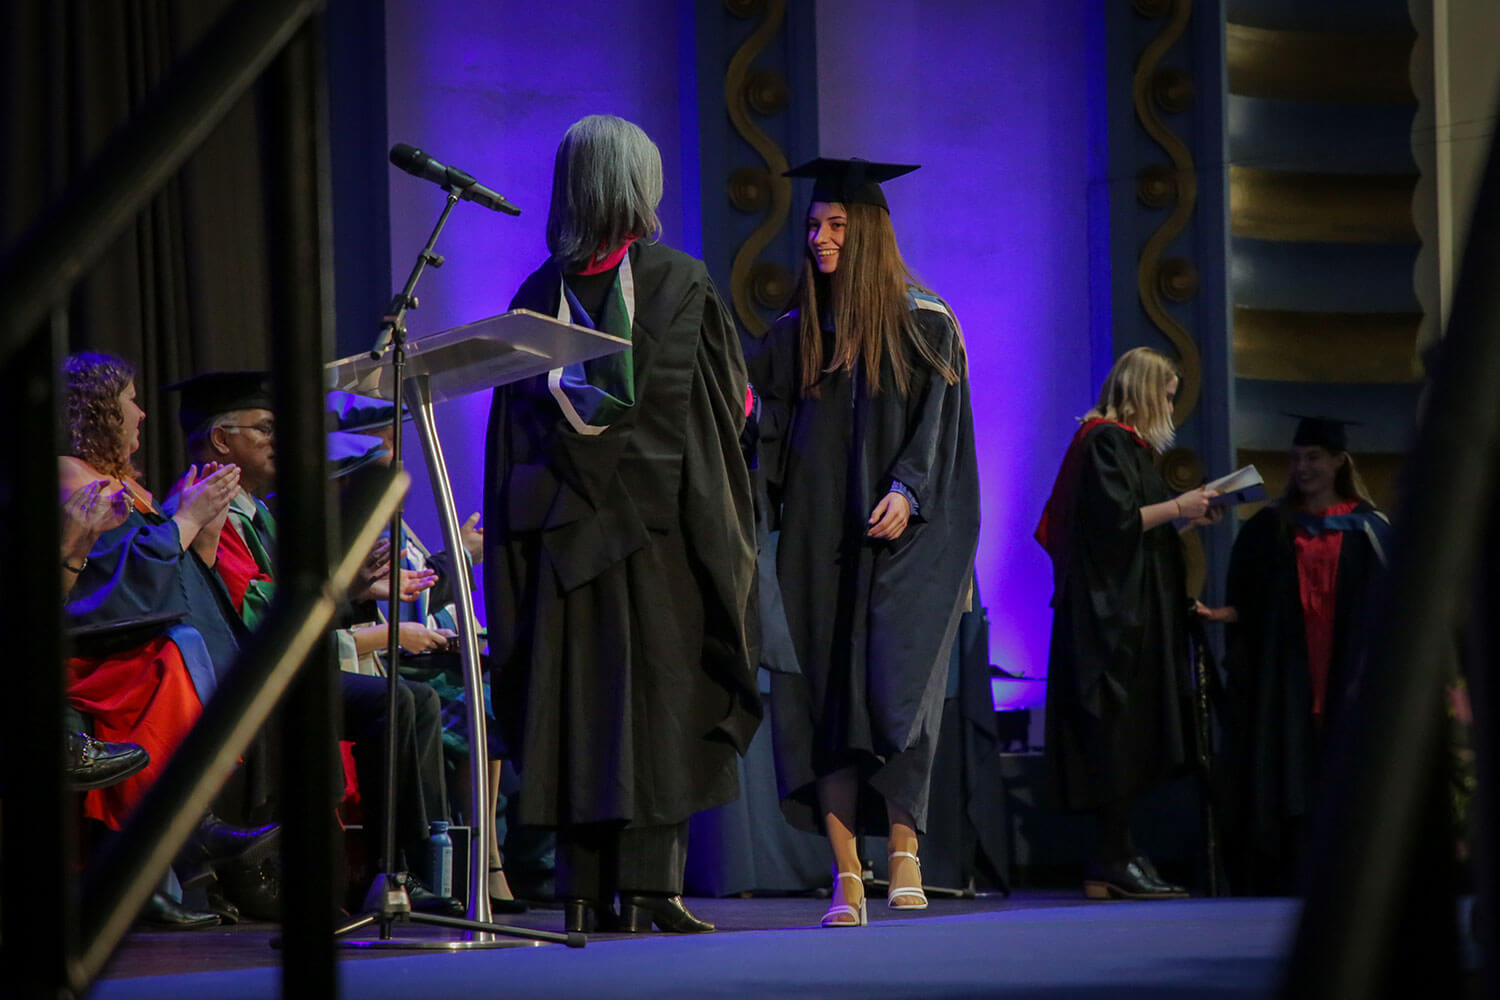 Graduand shakes hands with the Chancellor